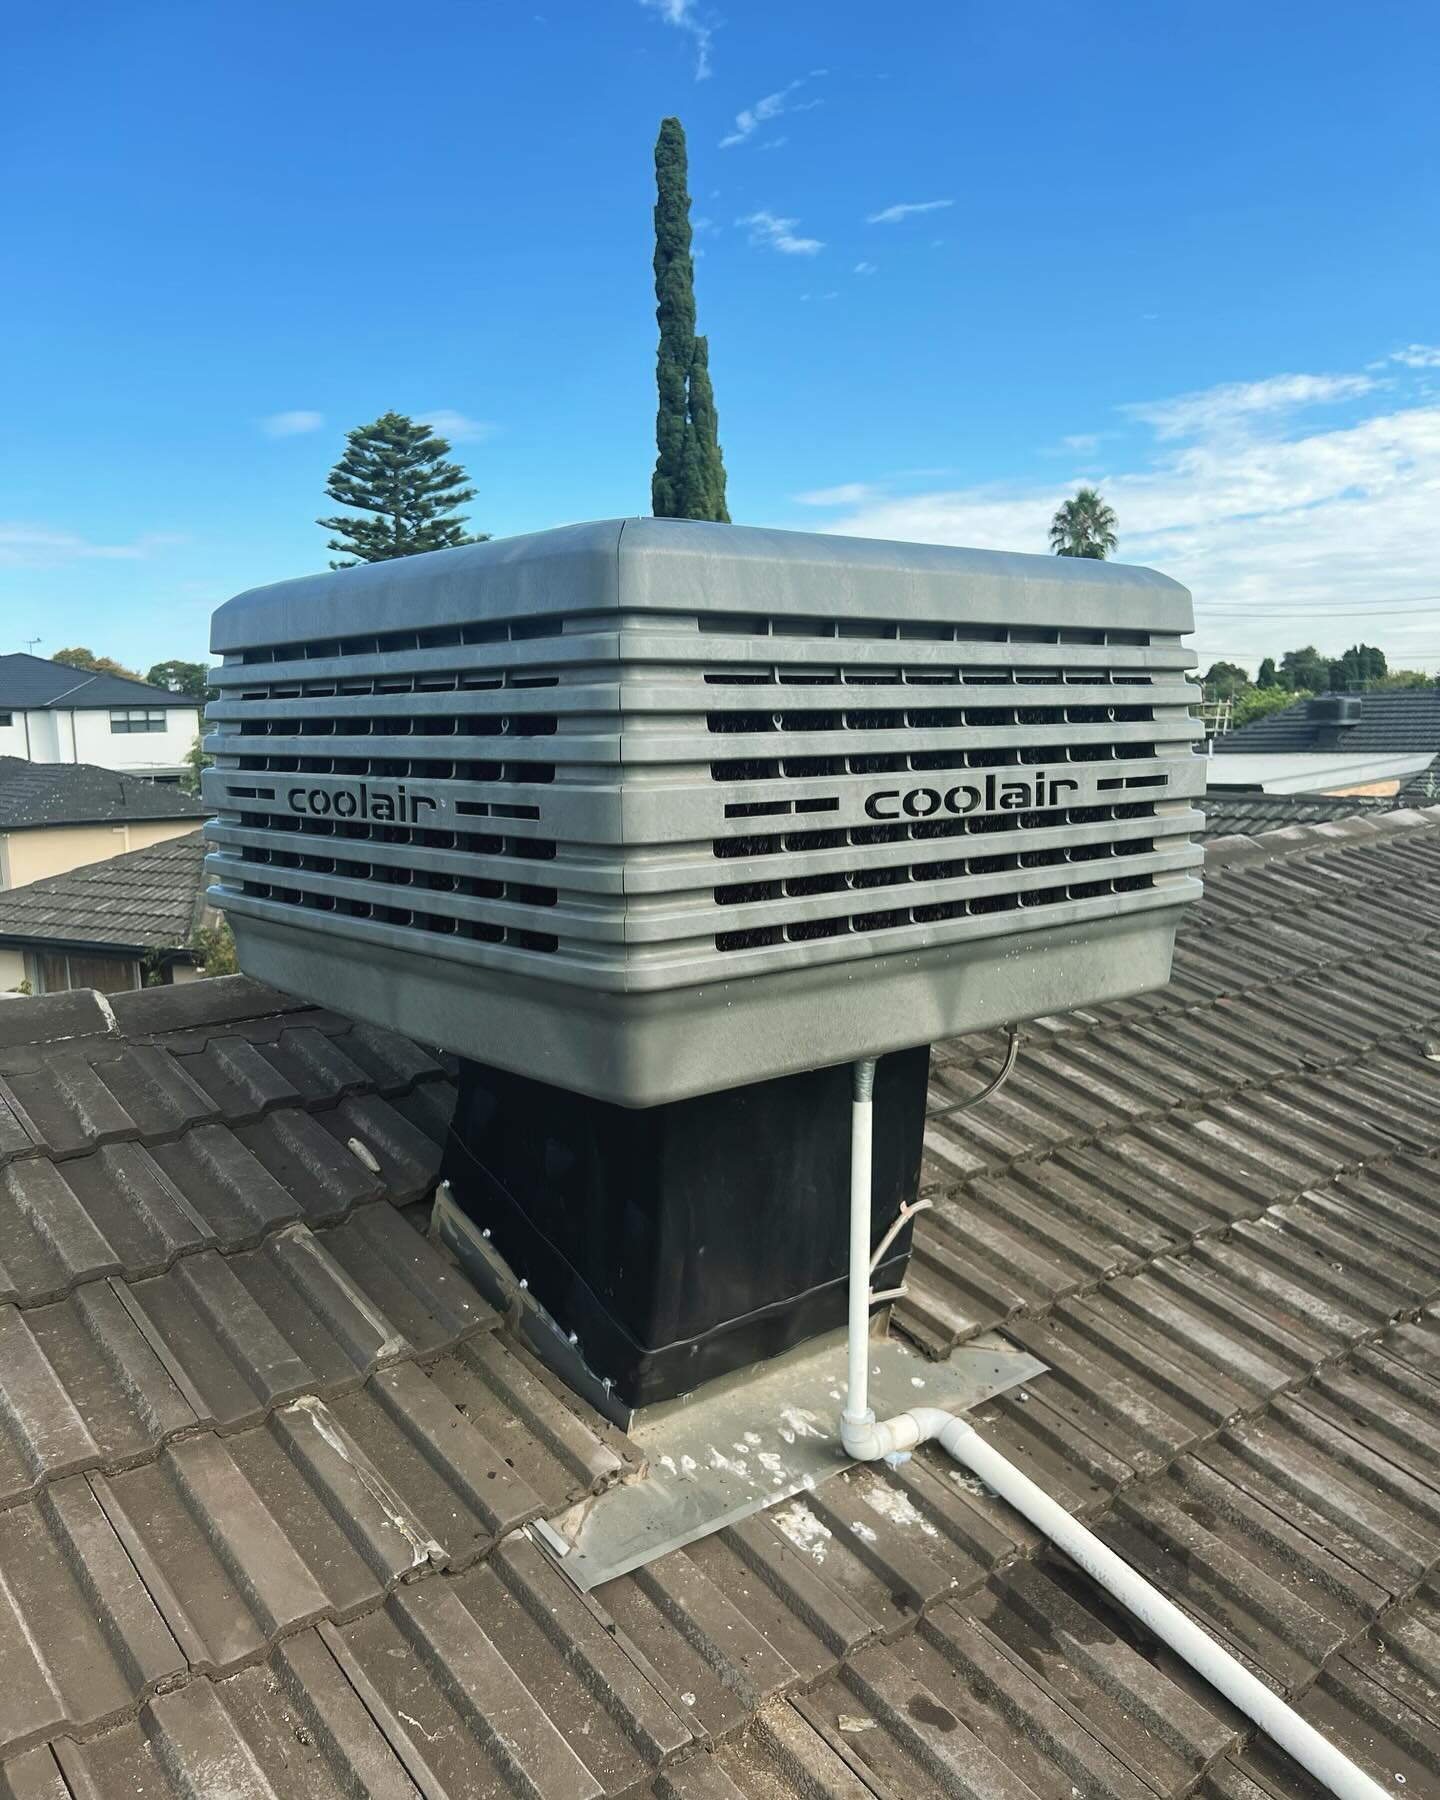 Evaporative cooler replacement. Out with the old &amp; in with the new! ❄️⁣
⁣
⁣
#evaporativecooler #changeover